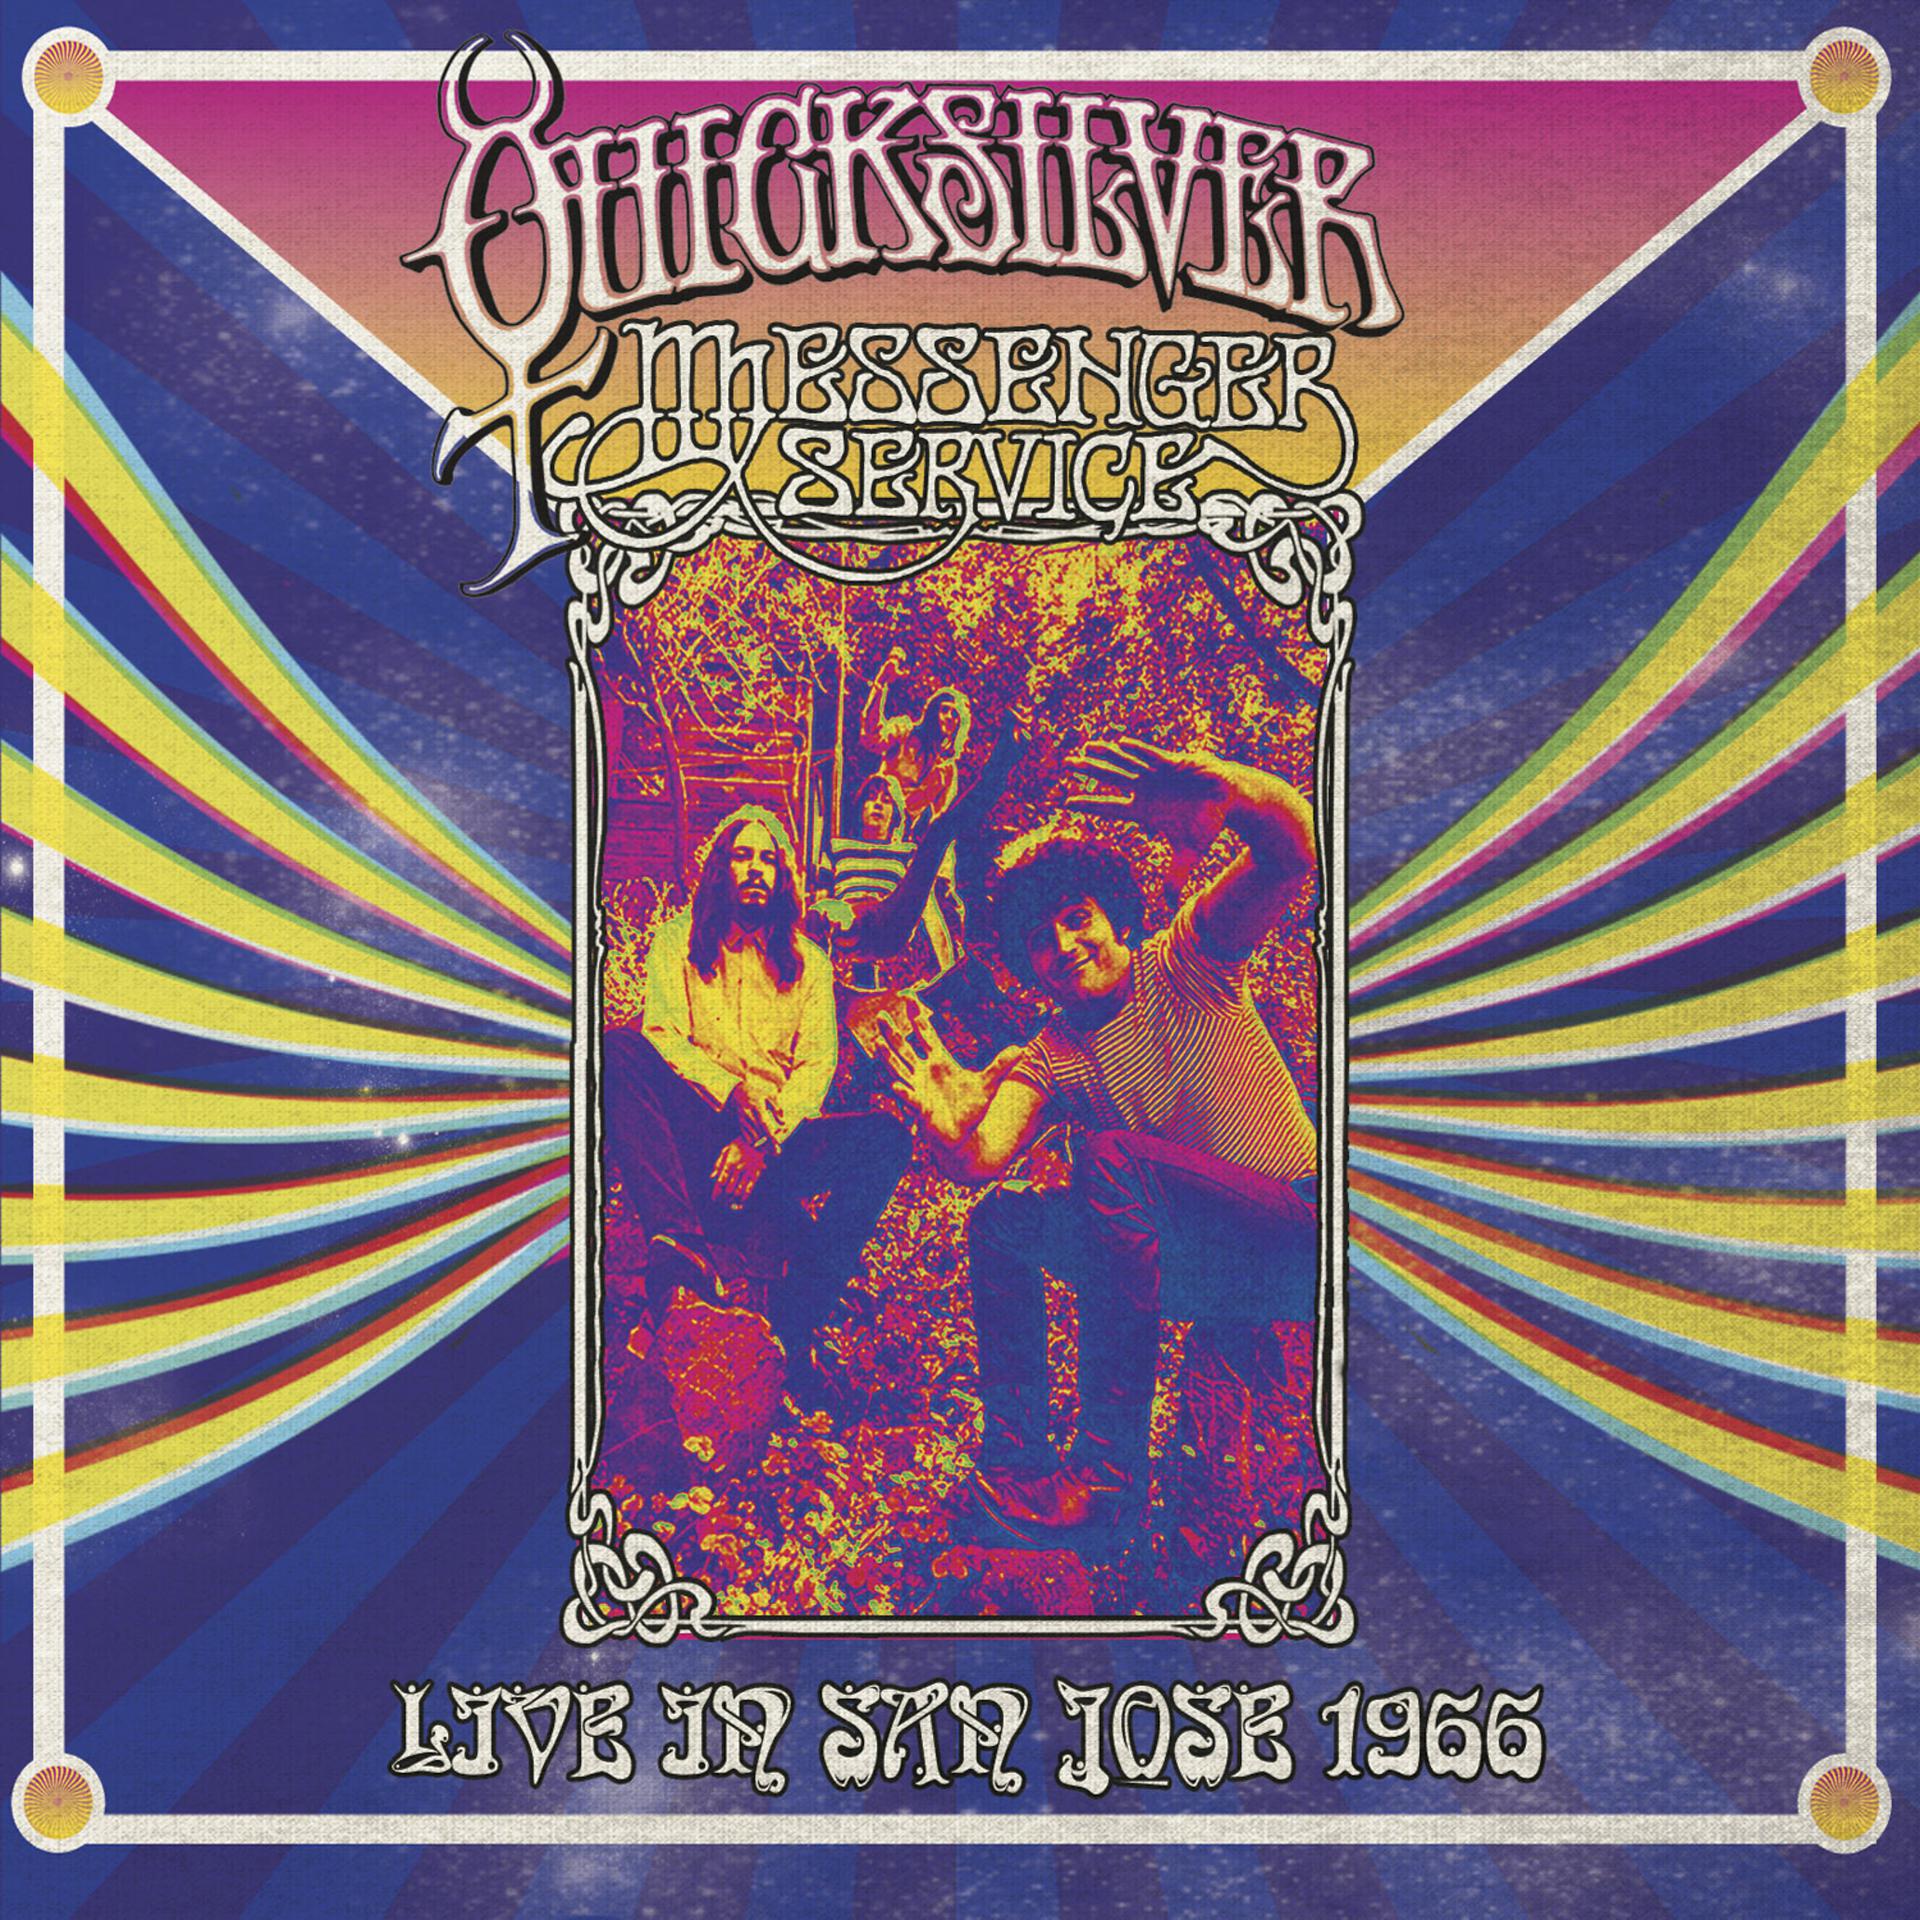 Quicksilver messenger. Quicksilver Messenger service. Quicksilver Messenger service - Doin' time in the USA. Quicksilver Messenger service - who do you Love Suite, who do you Love (Part 1).